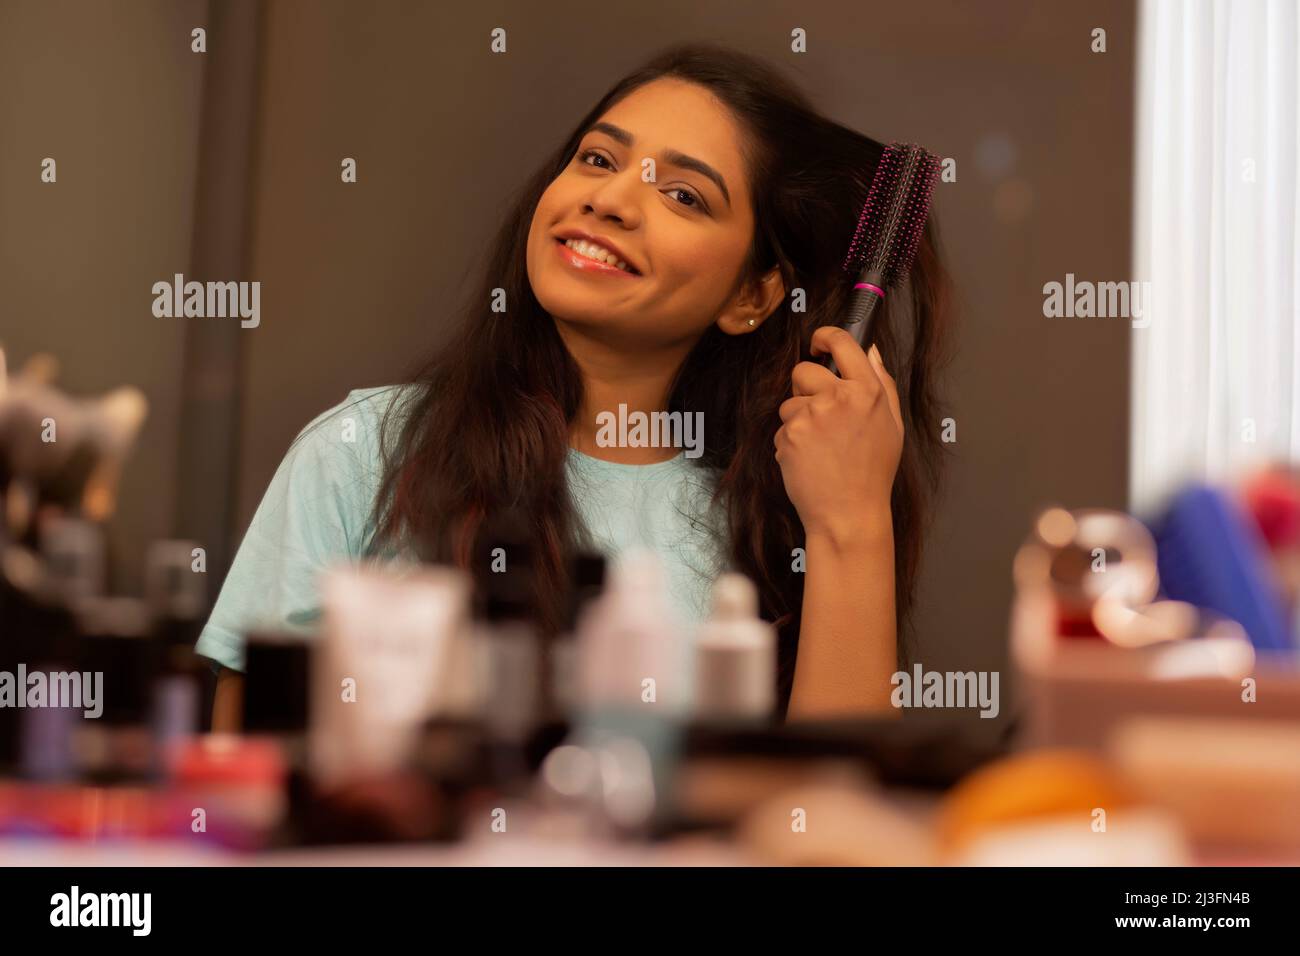 Young woman combing her hair in front of mirror Stock Photo